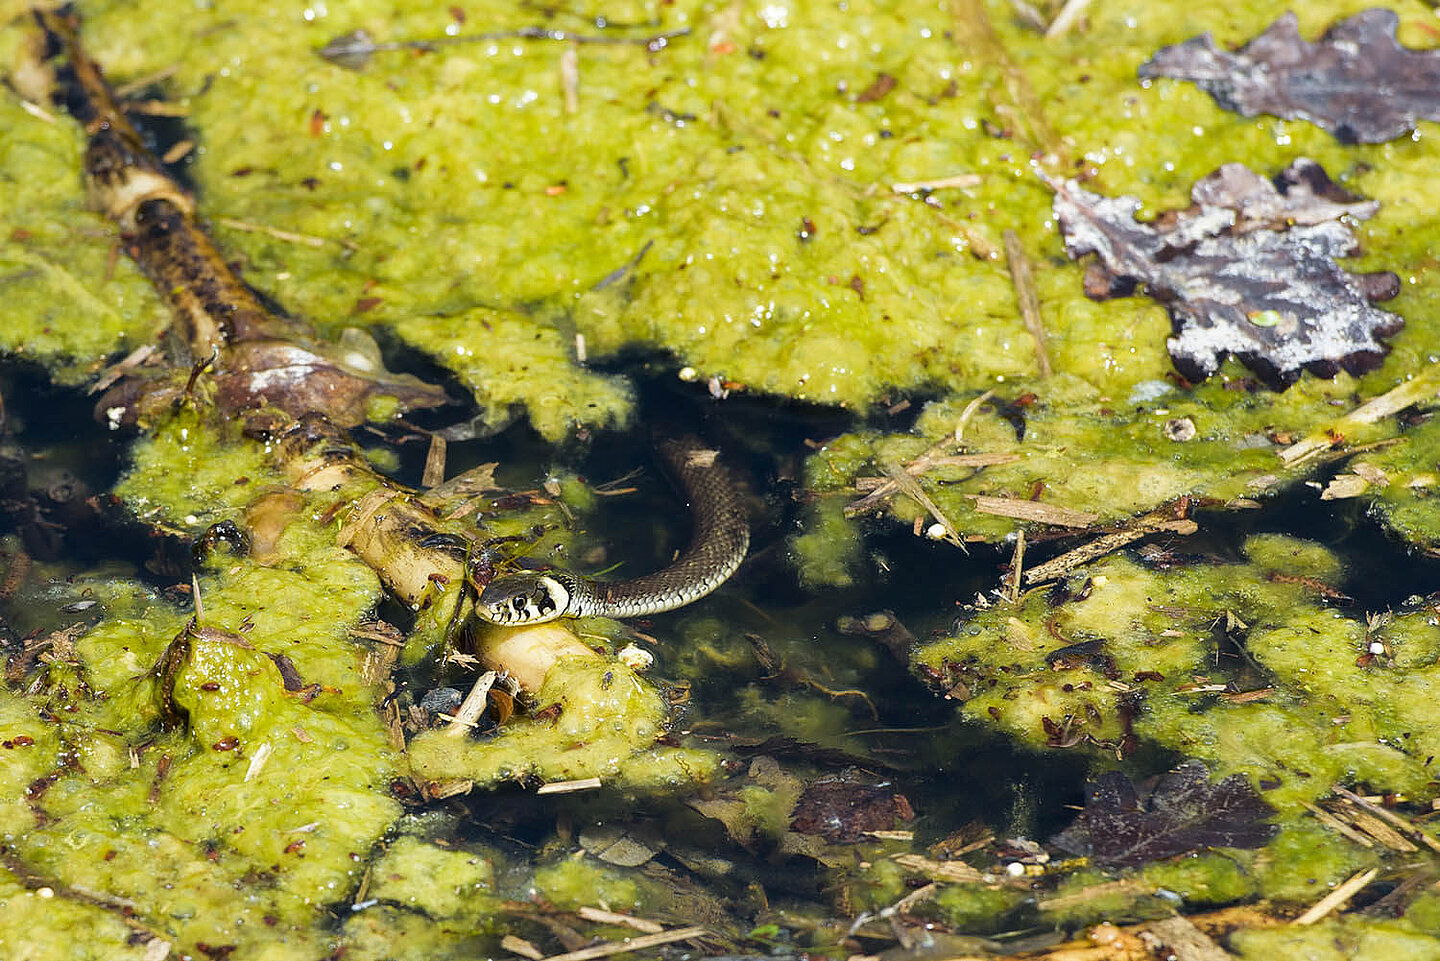 A grass snake slithers among the algae over a floating piece of wood